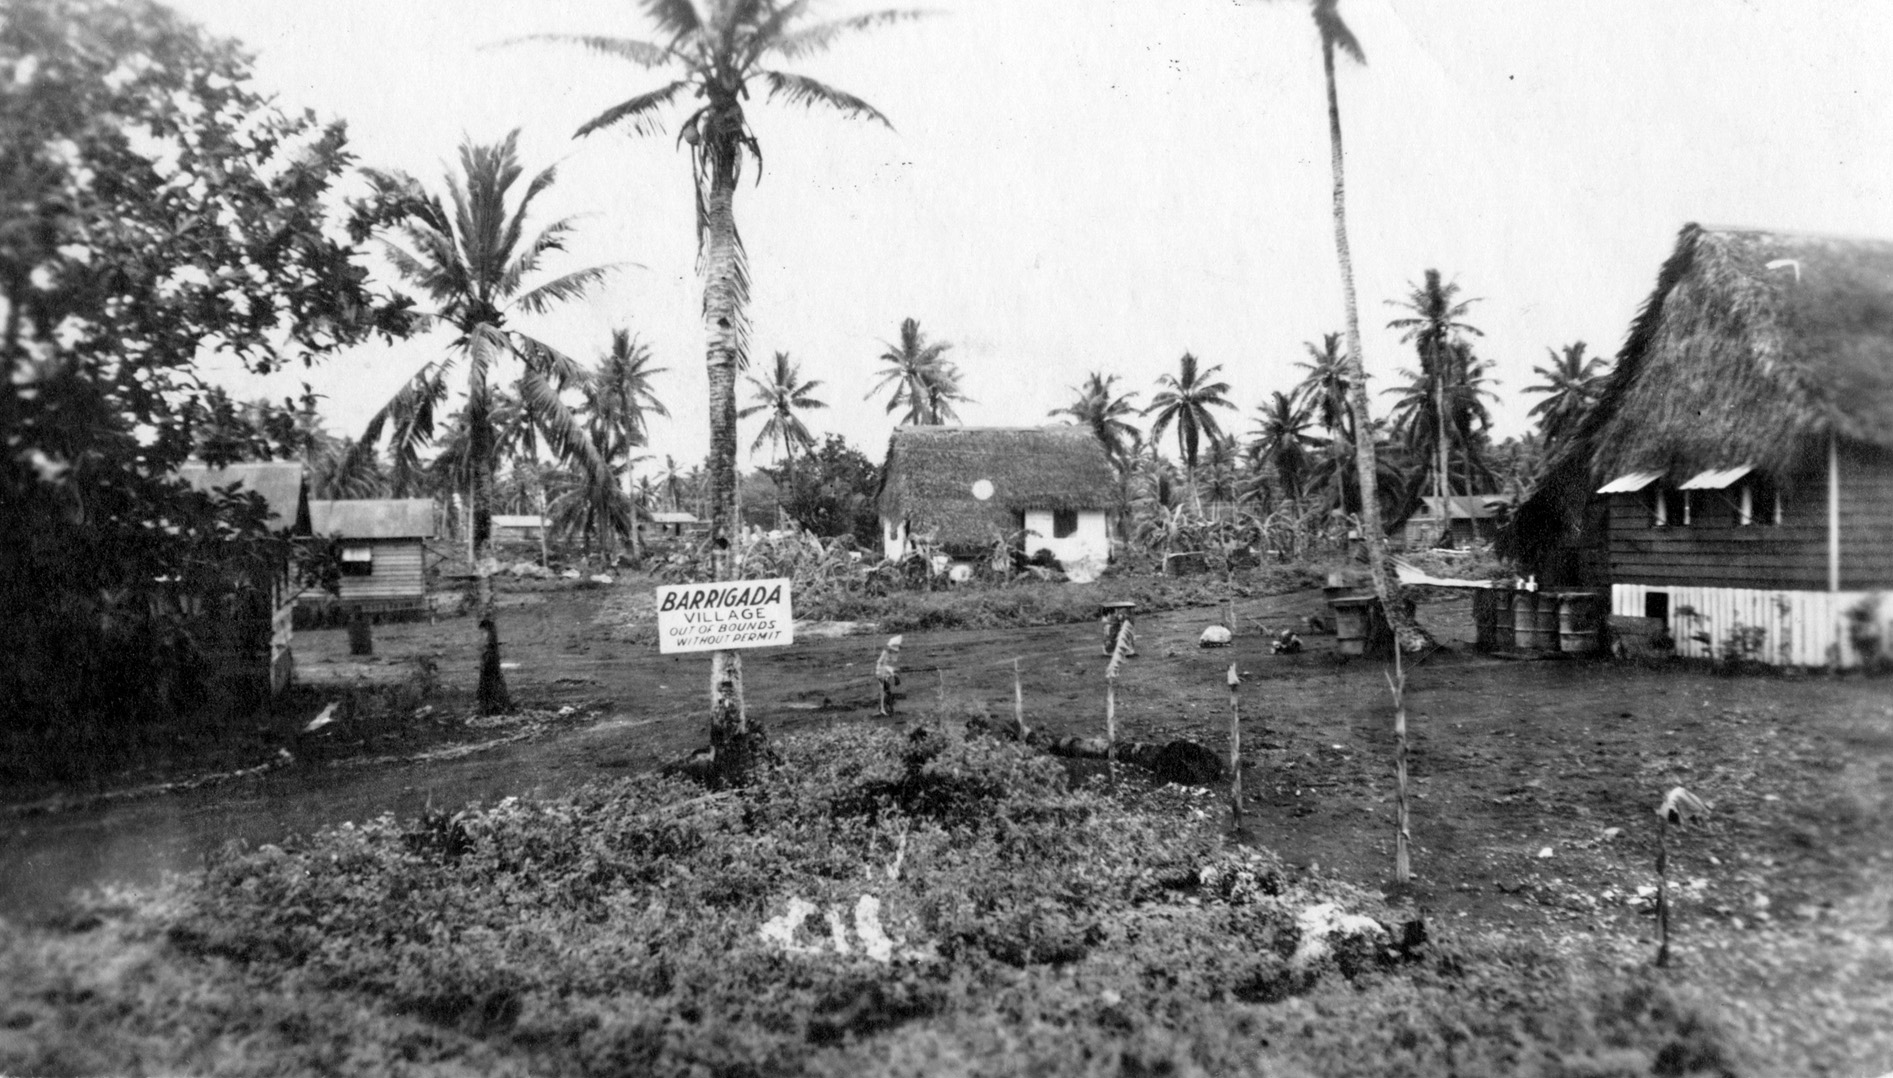 Soldiers of the 77th Division fought the Japanese for control of a precious water source at the village of Barrigada. The opposing forces clashed for two days, and both sides used tanks in the fight to take possession of the town’s 30,000-gallon reservoir.